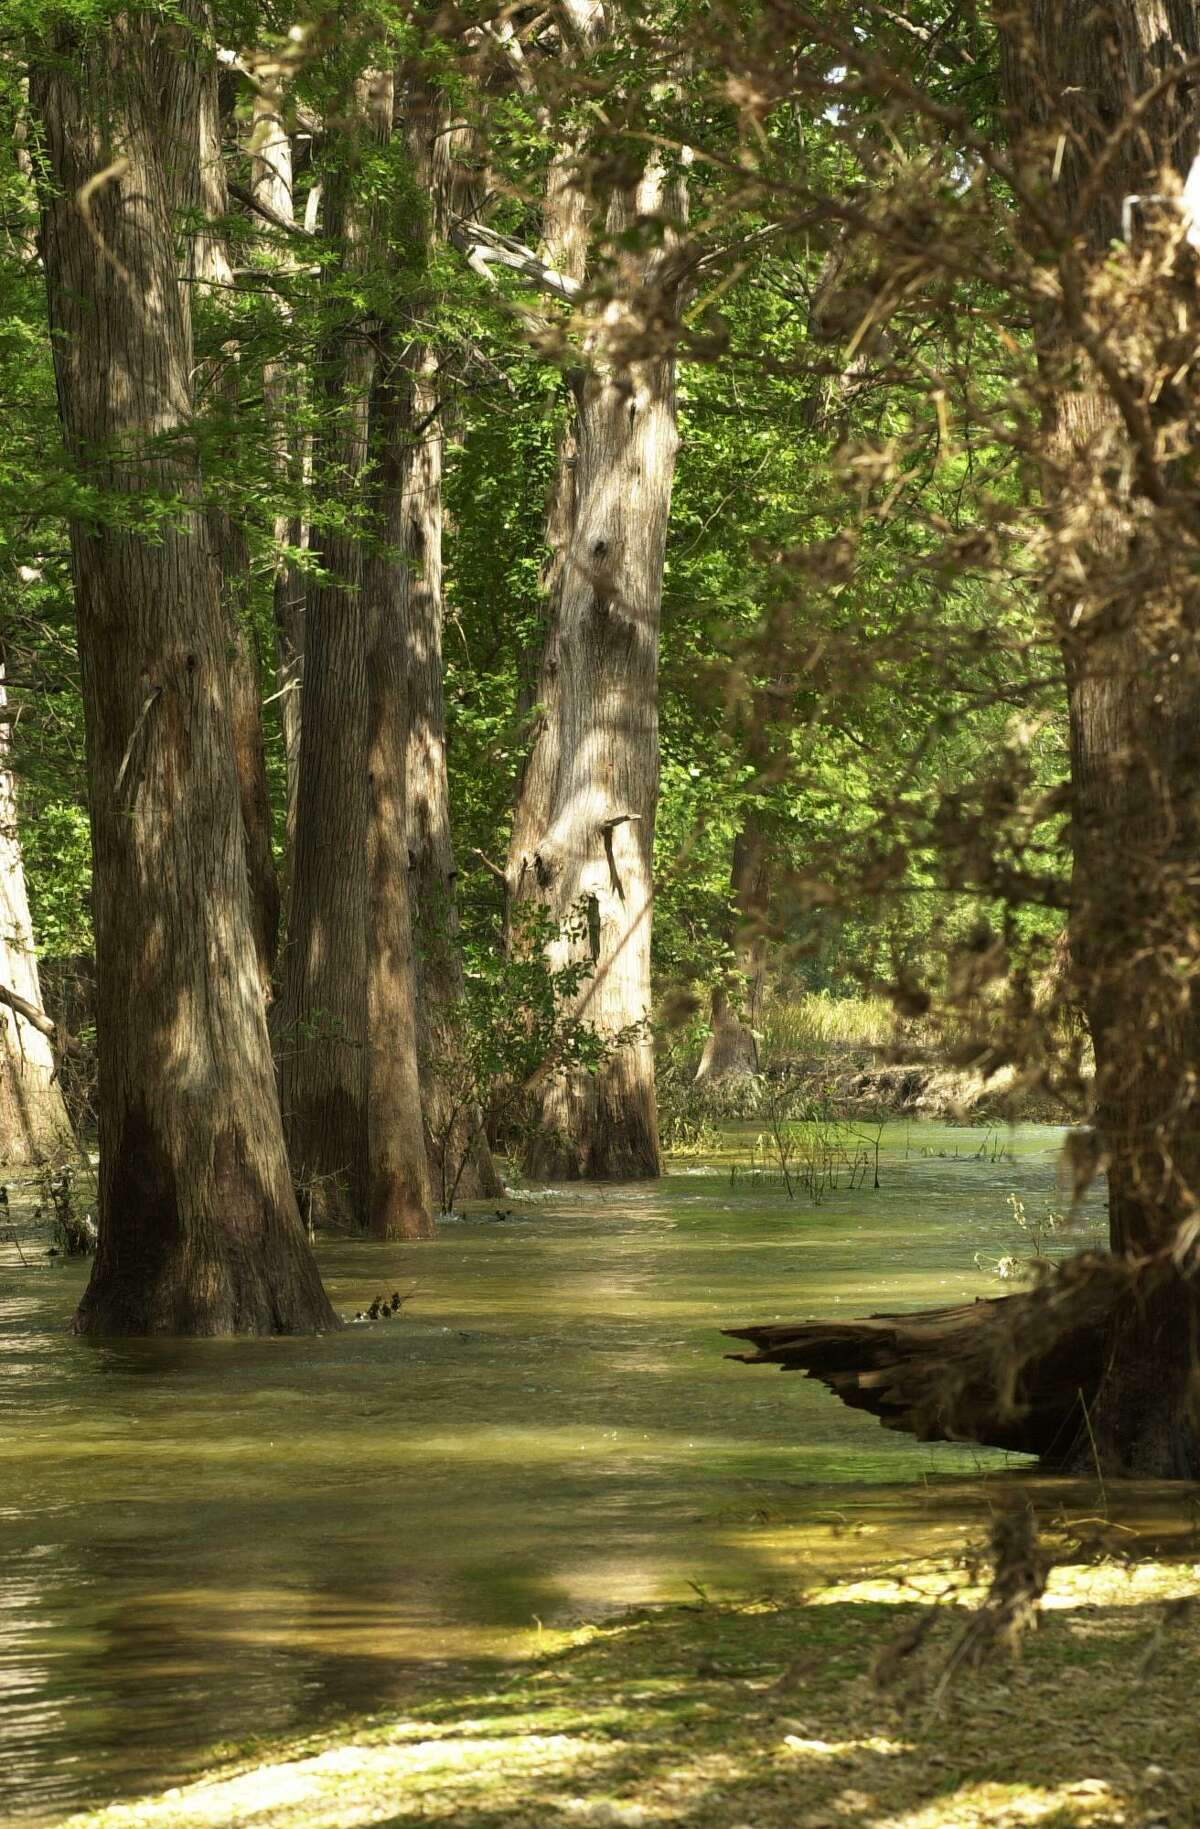 Three cypress trees line Cibolo Creek at the Cibolo Nature Center in this file photo. The Boerne City Council has denied a zoning request for nearby acreage that critics said would have allowed too many apartments for the area’s roads and endangered the creek’s water quality. Developers said their design went to great lengths to protect the creek.